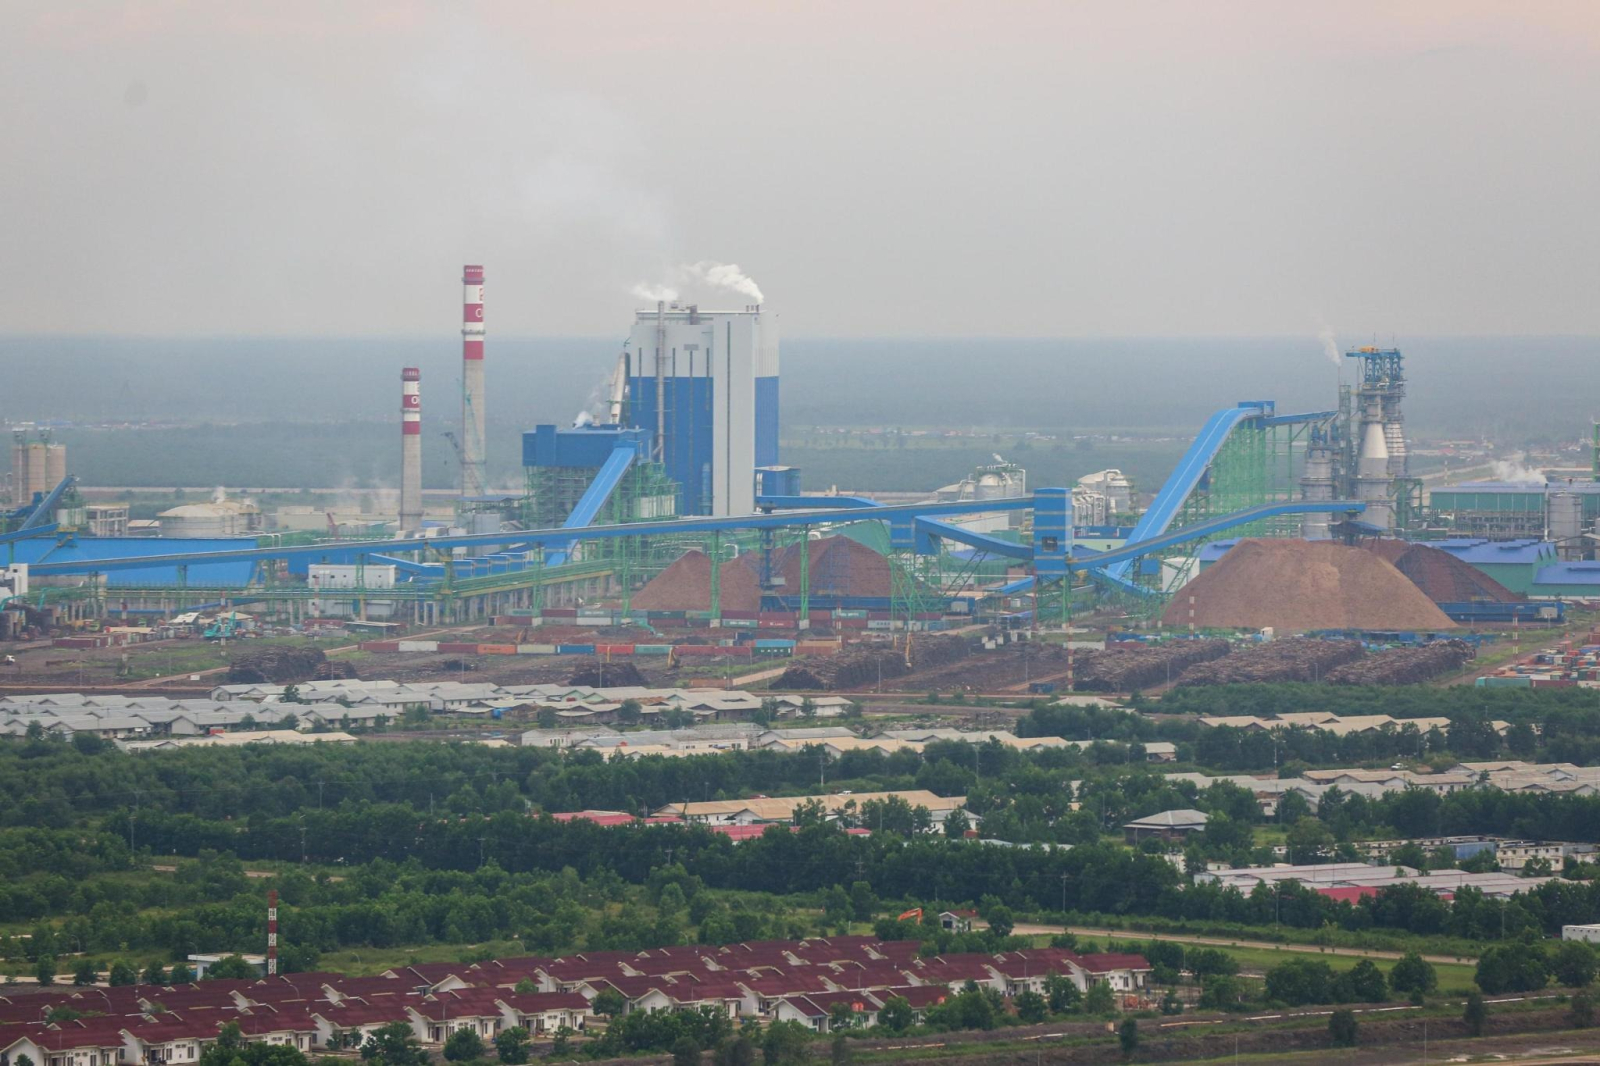 Wide shot of a giant paper mill in Indonesia